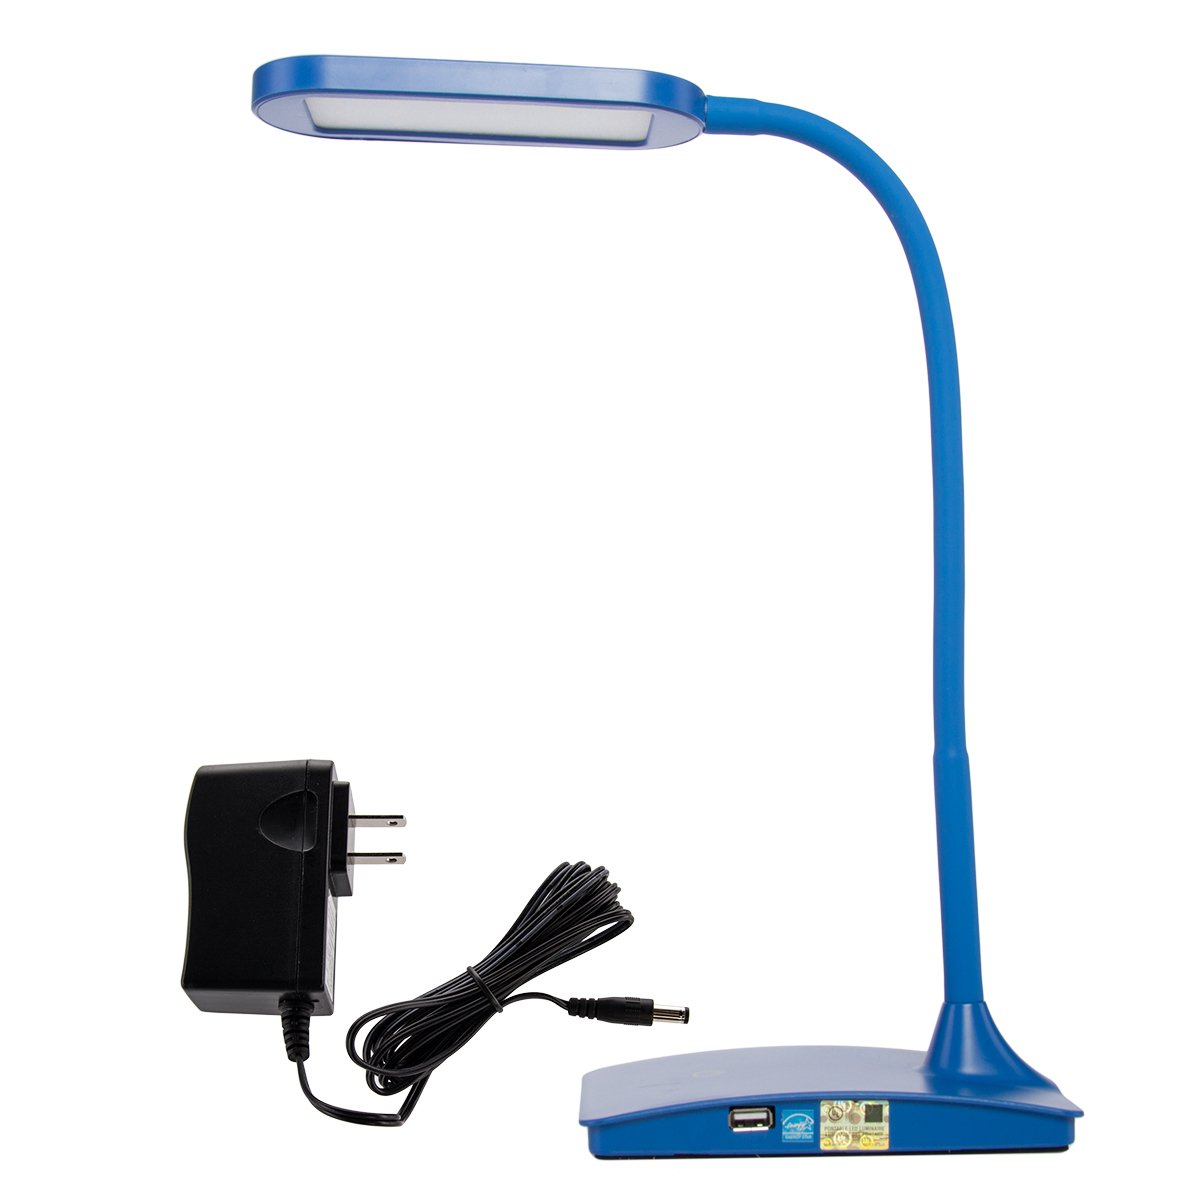 3-Way Touch Switch, TW Lighting IVY LED Desk Lamp with USB Port 